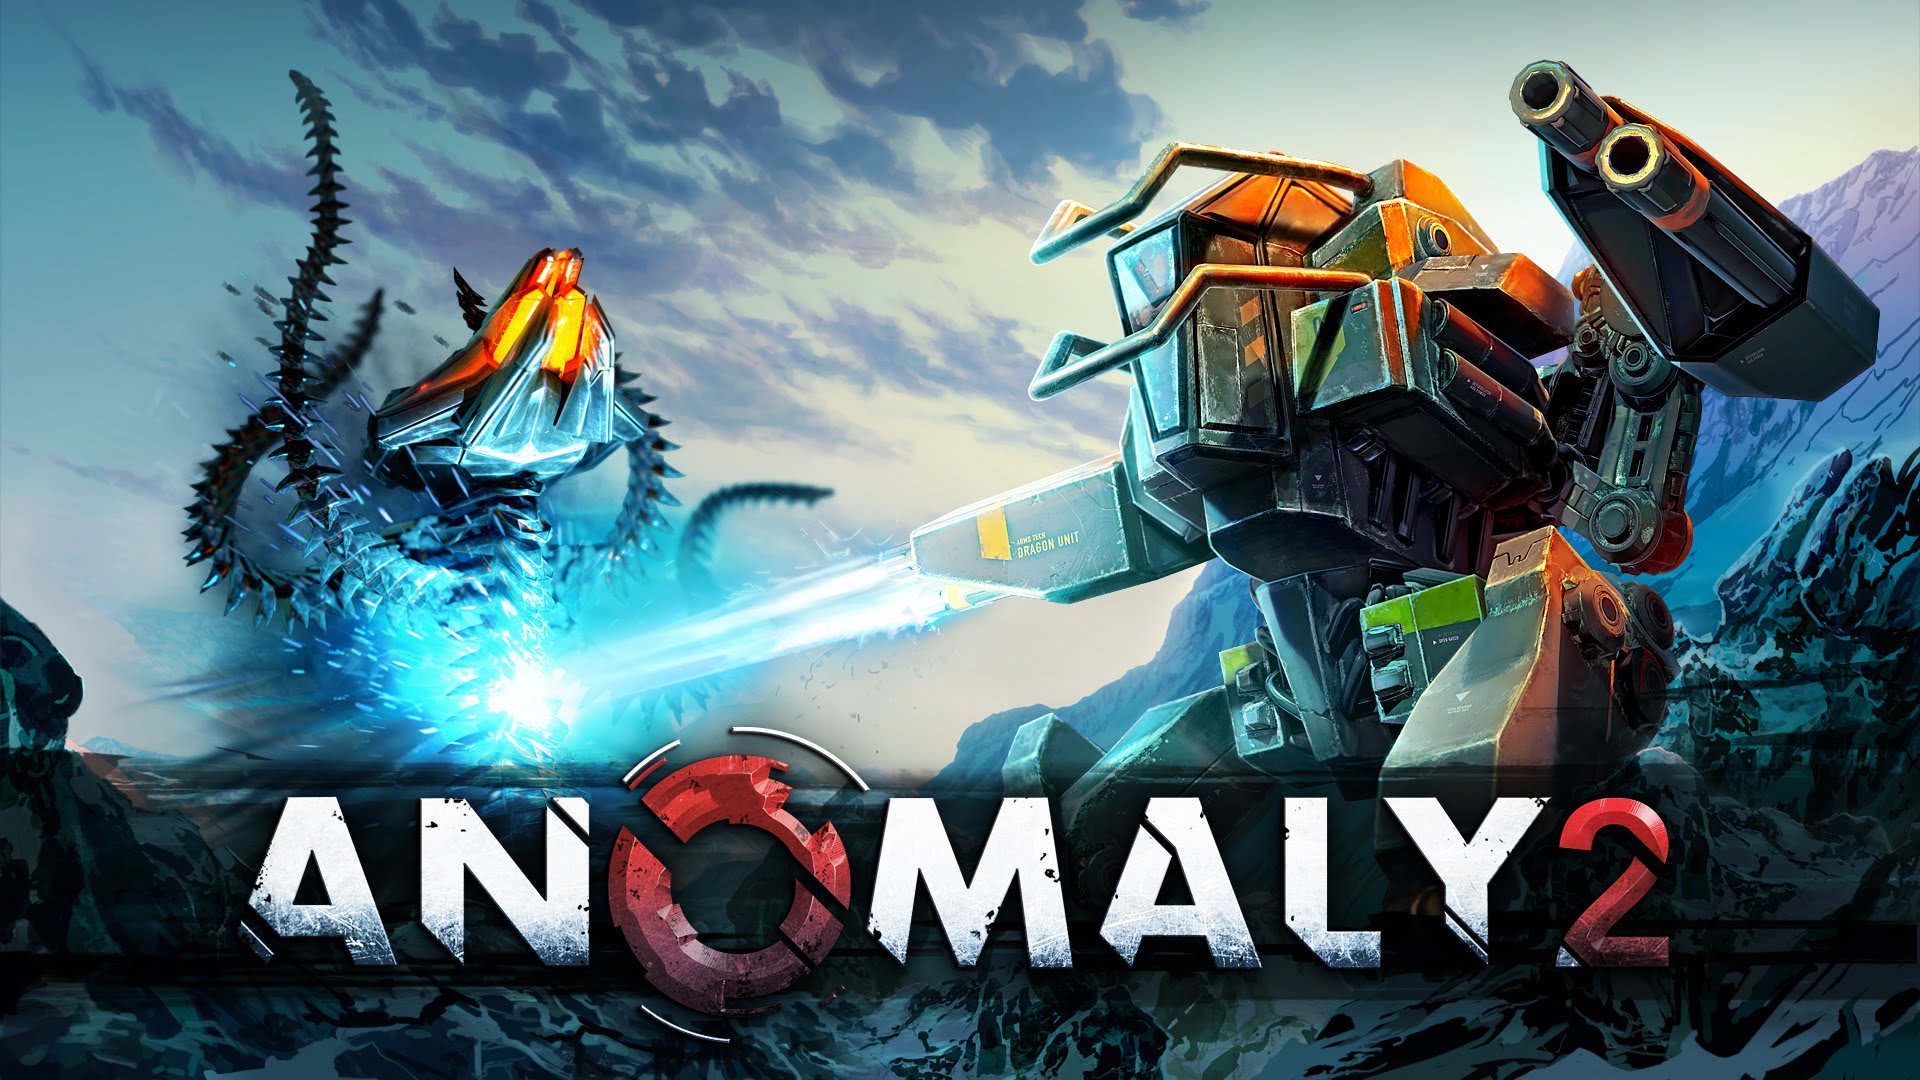 Classic Tower Offense Title 'Anomaly 2' Has Finally Returned to the App Store as a $14.99 Self-Published Re-Release